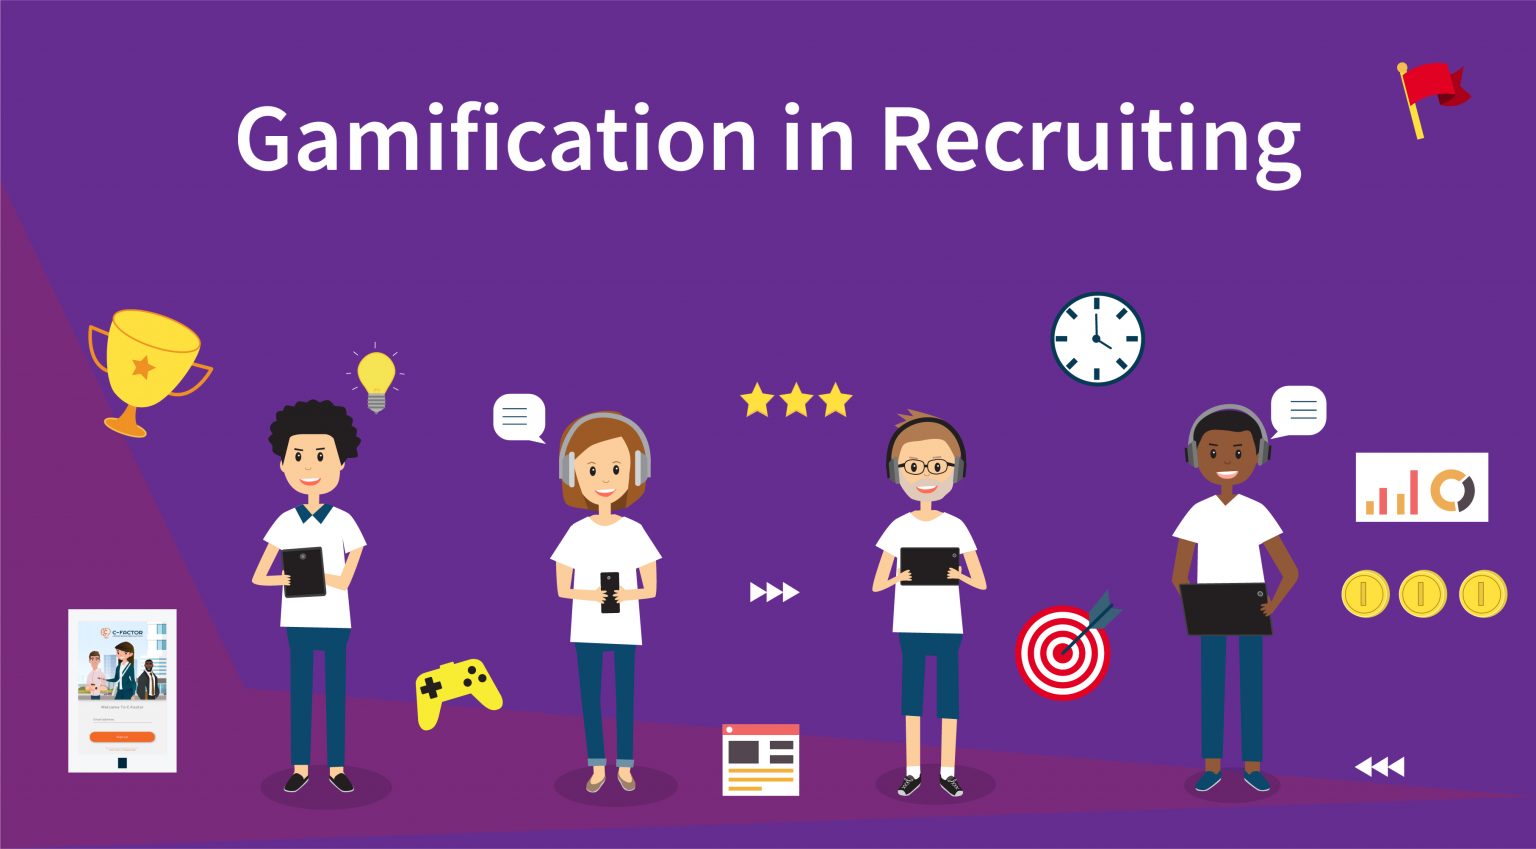 Gamification in recruiting